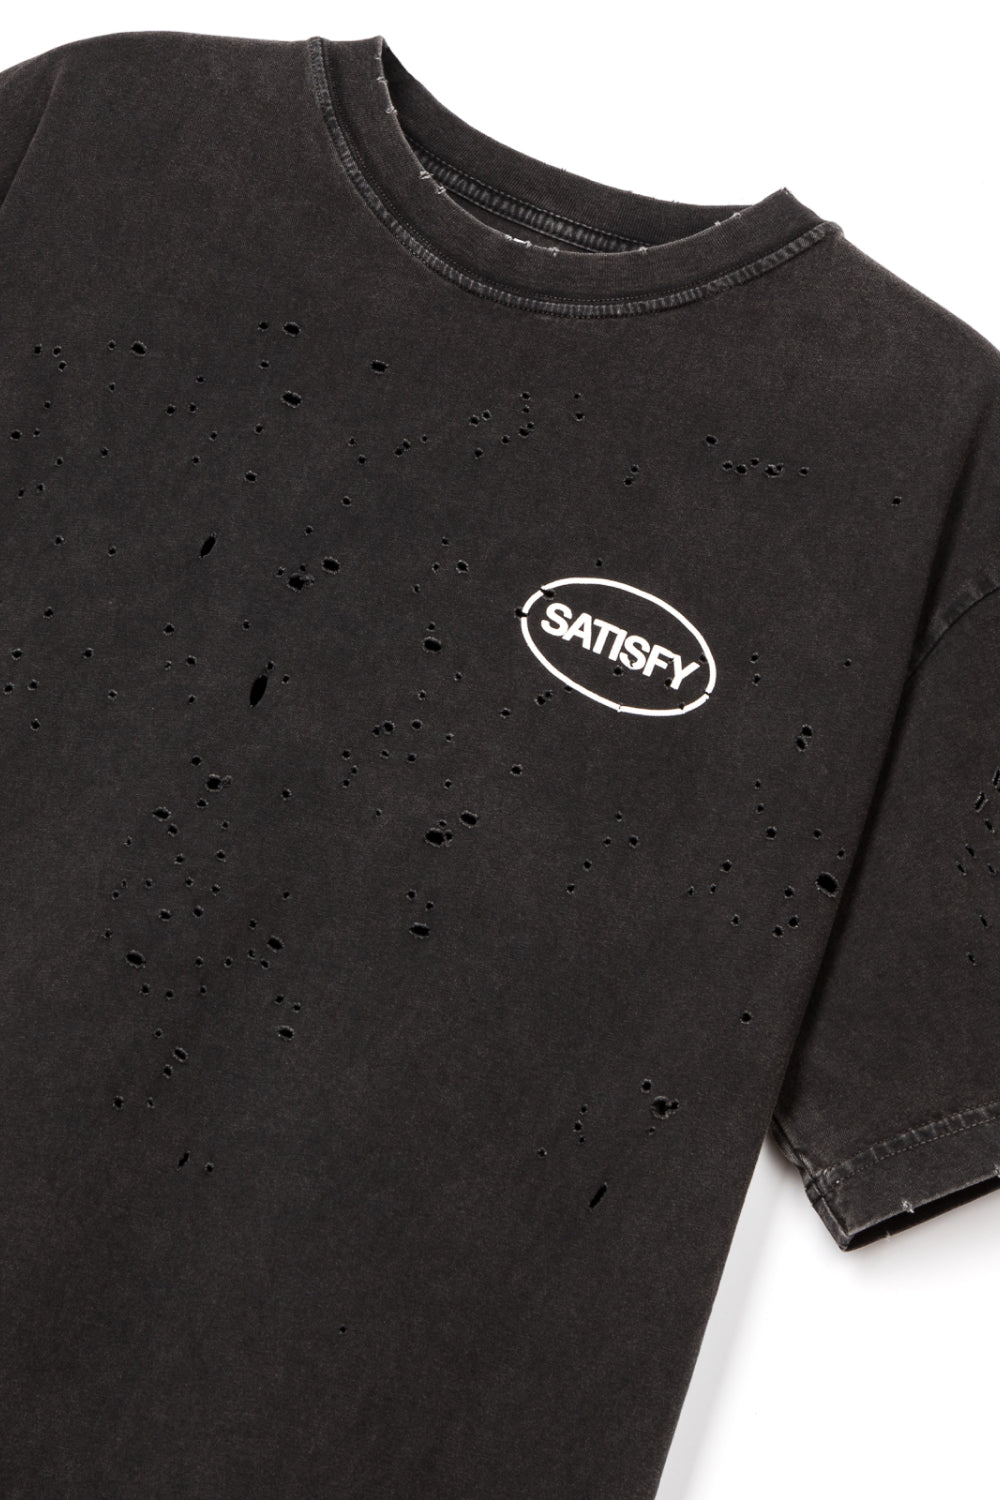 Satisfy MothTech™ T-Shirt - Aged Black | Coffee Outdoors